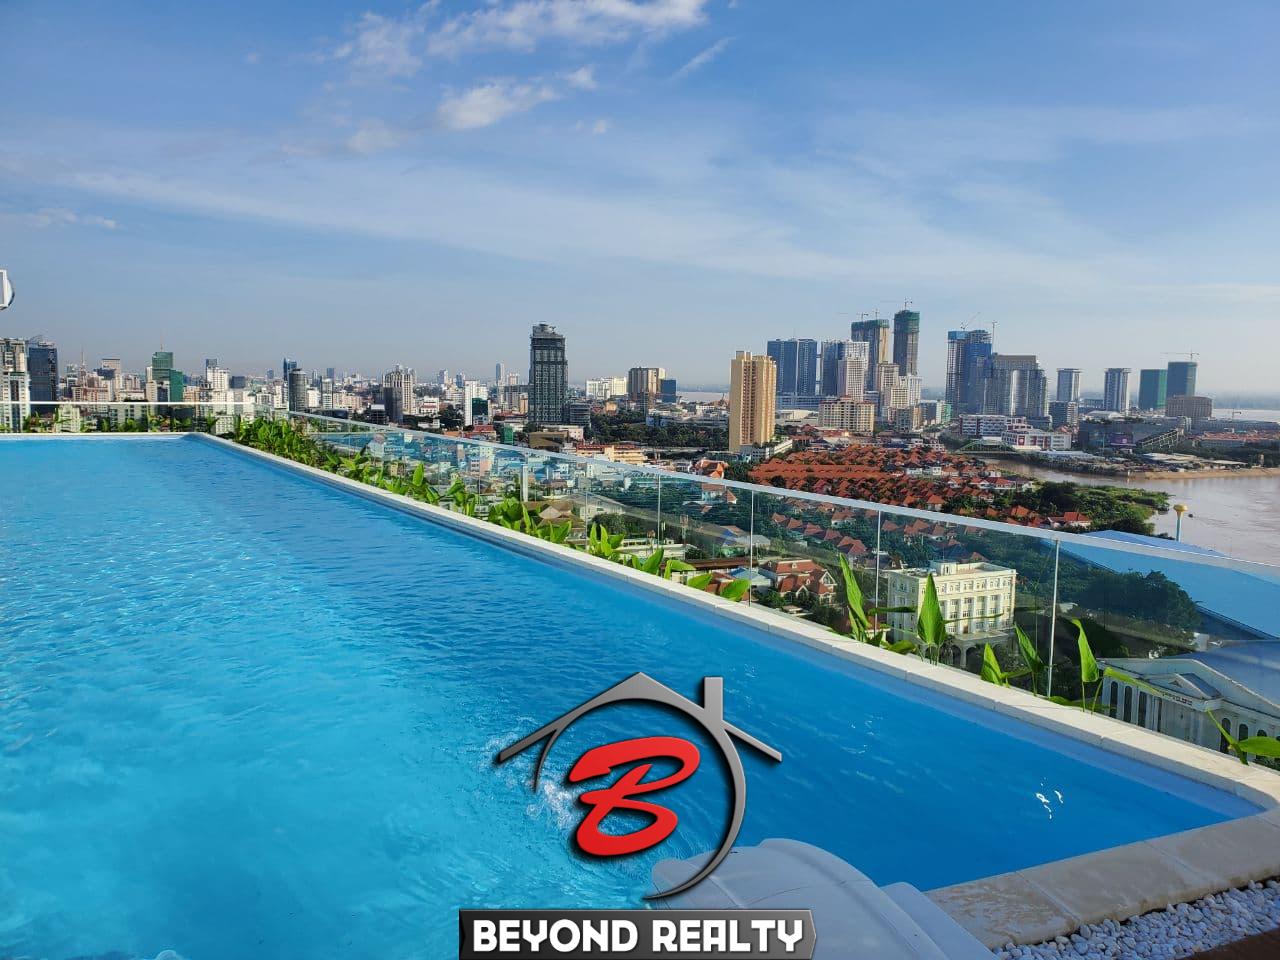 the swimming pool of the luxury serviced apartment at BKK1 in Phnom Penh Cambodia